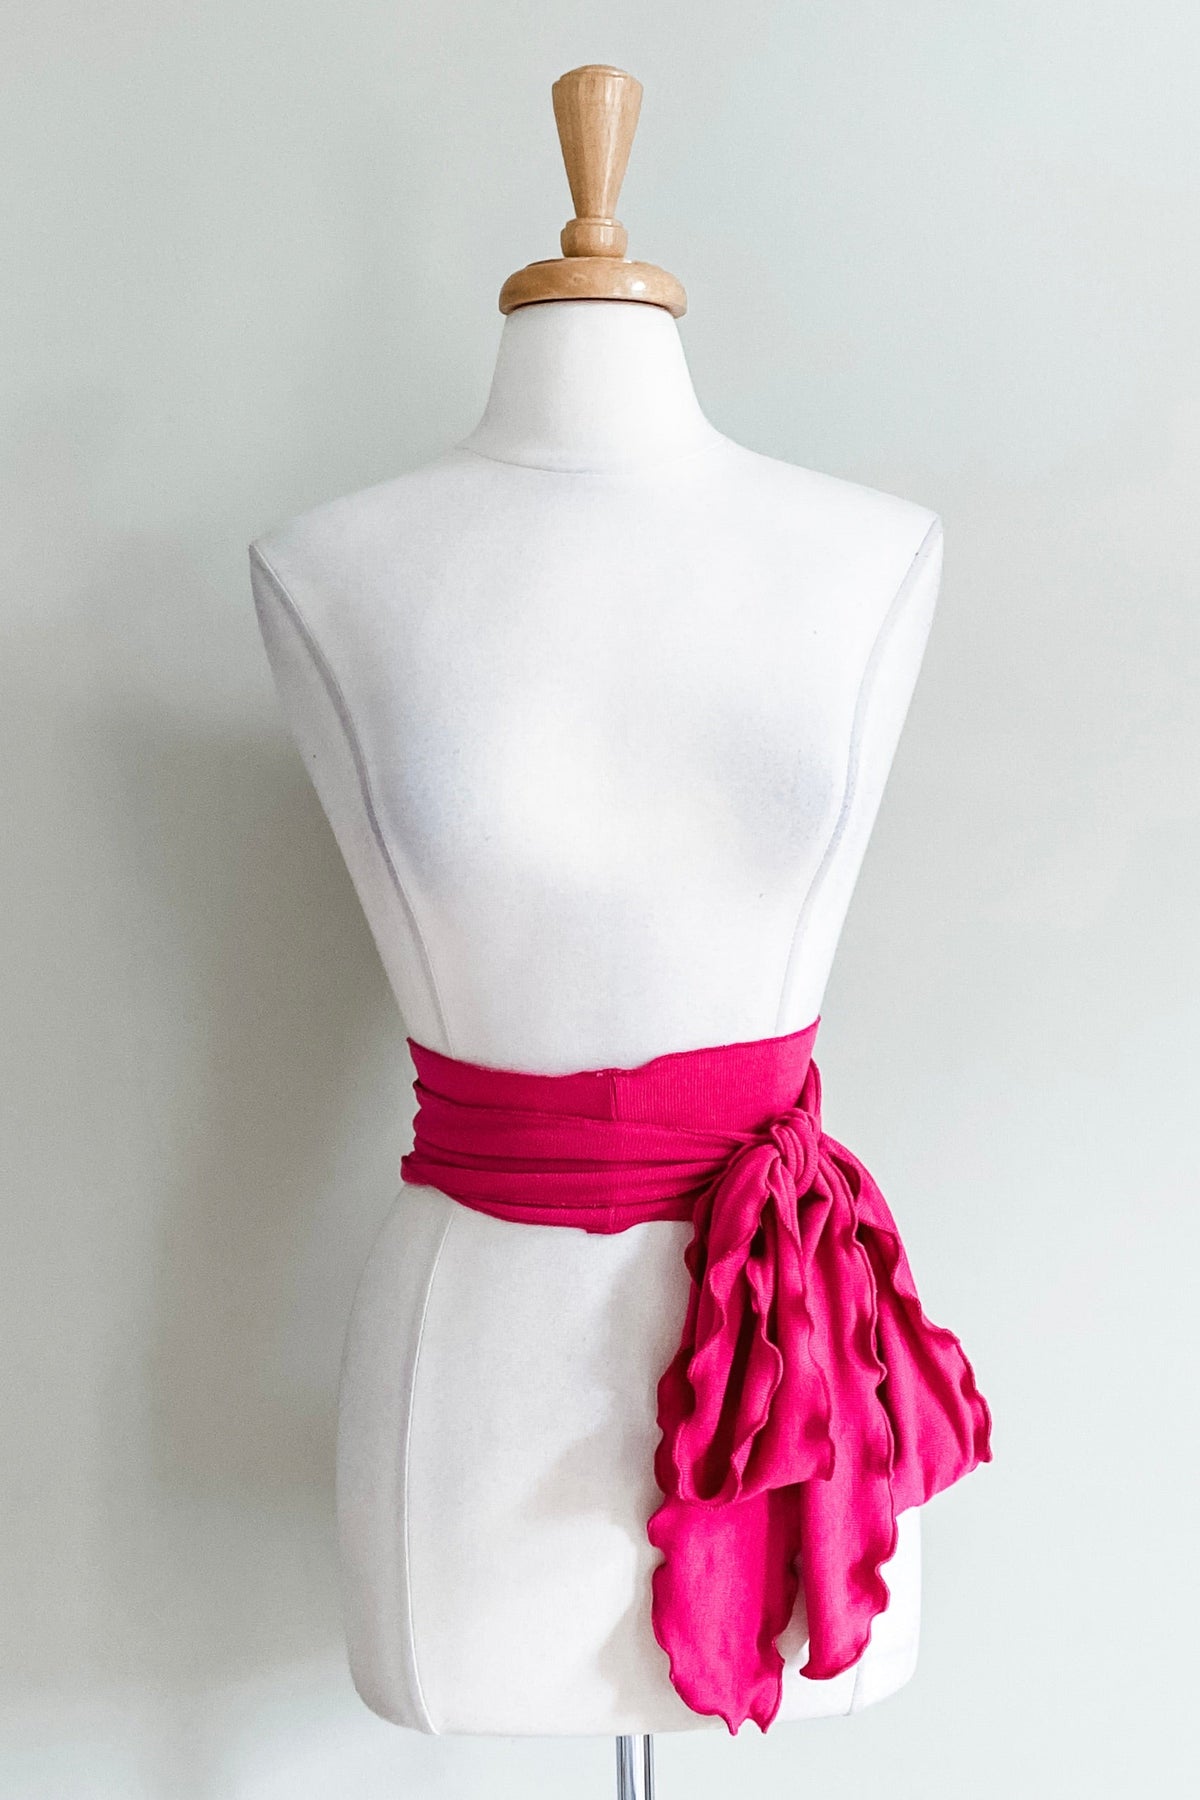 Matching Sash in Fuchsia color from Diane Kroe